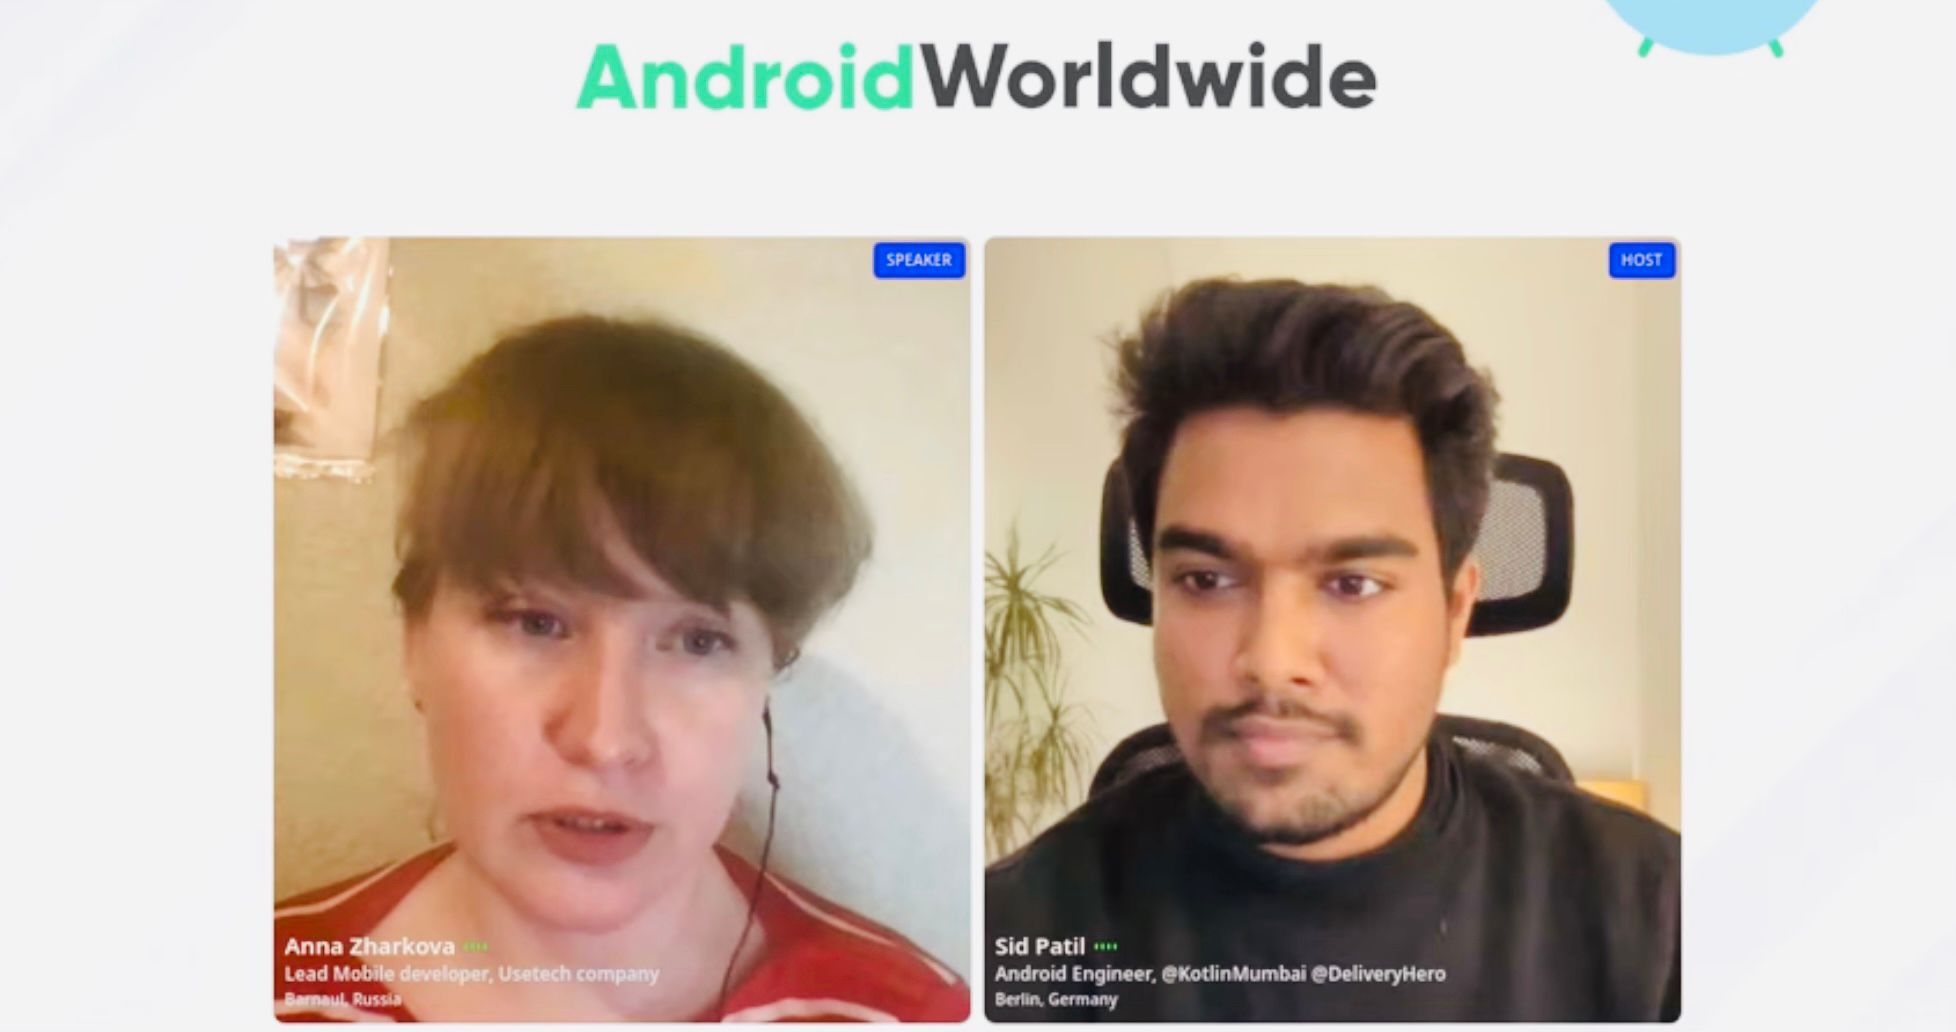 An international collective of developer communities who like to put on quarterly events for Android Devs and related engineering specialties. Sid Patil and Gabor Varadi at Android worldwide July 2021